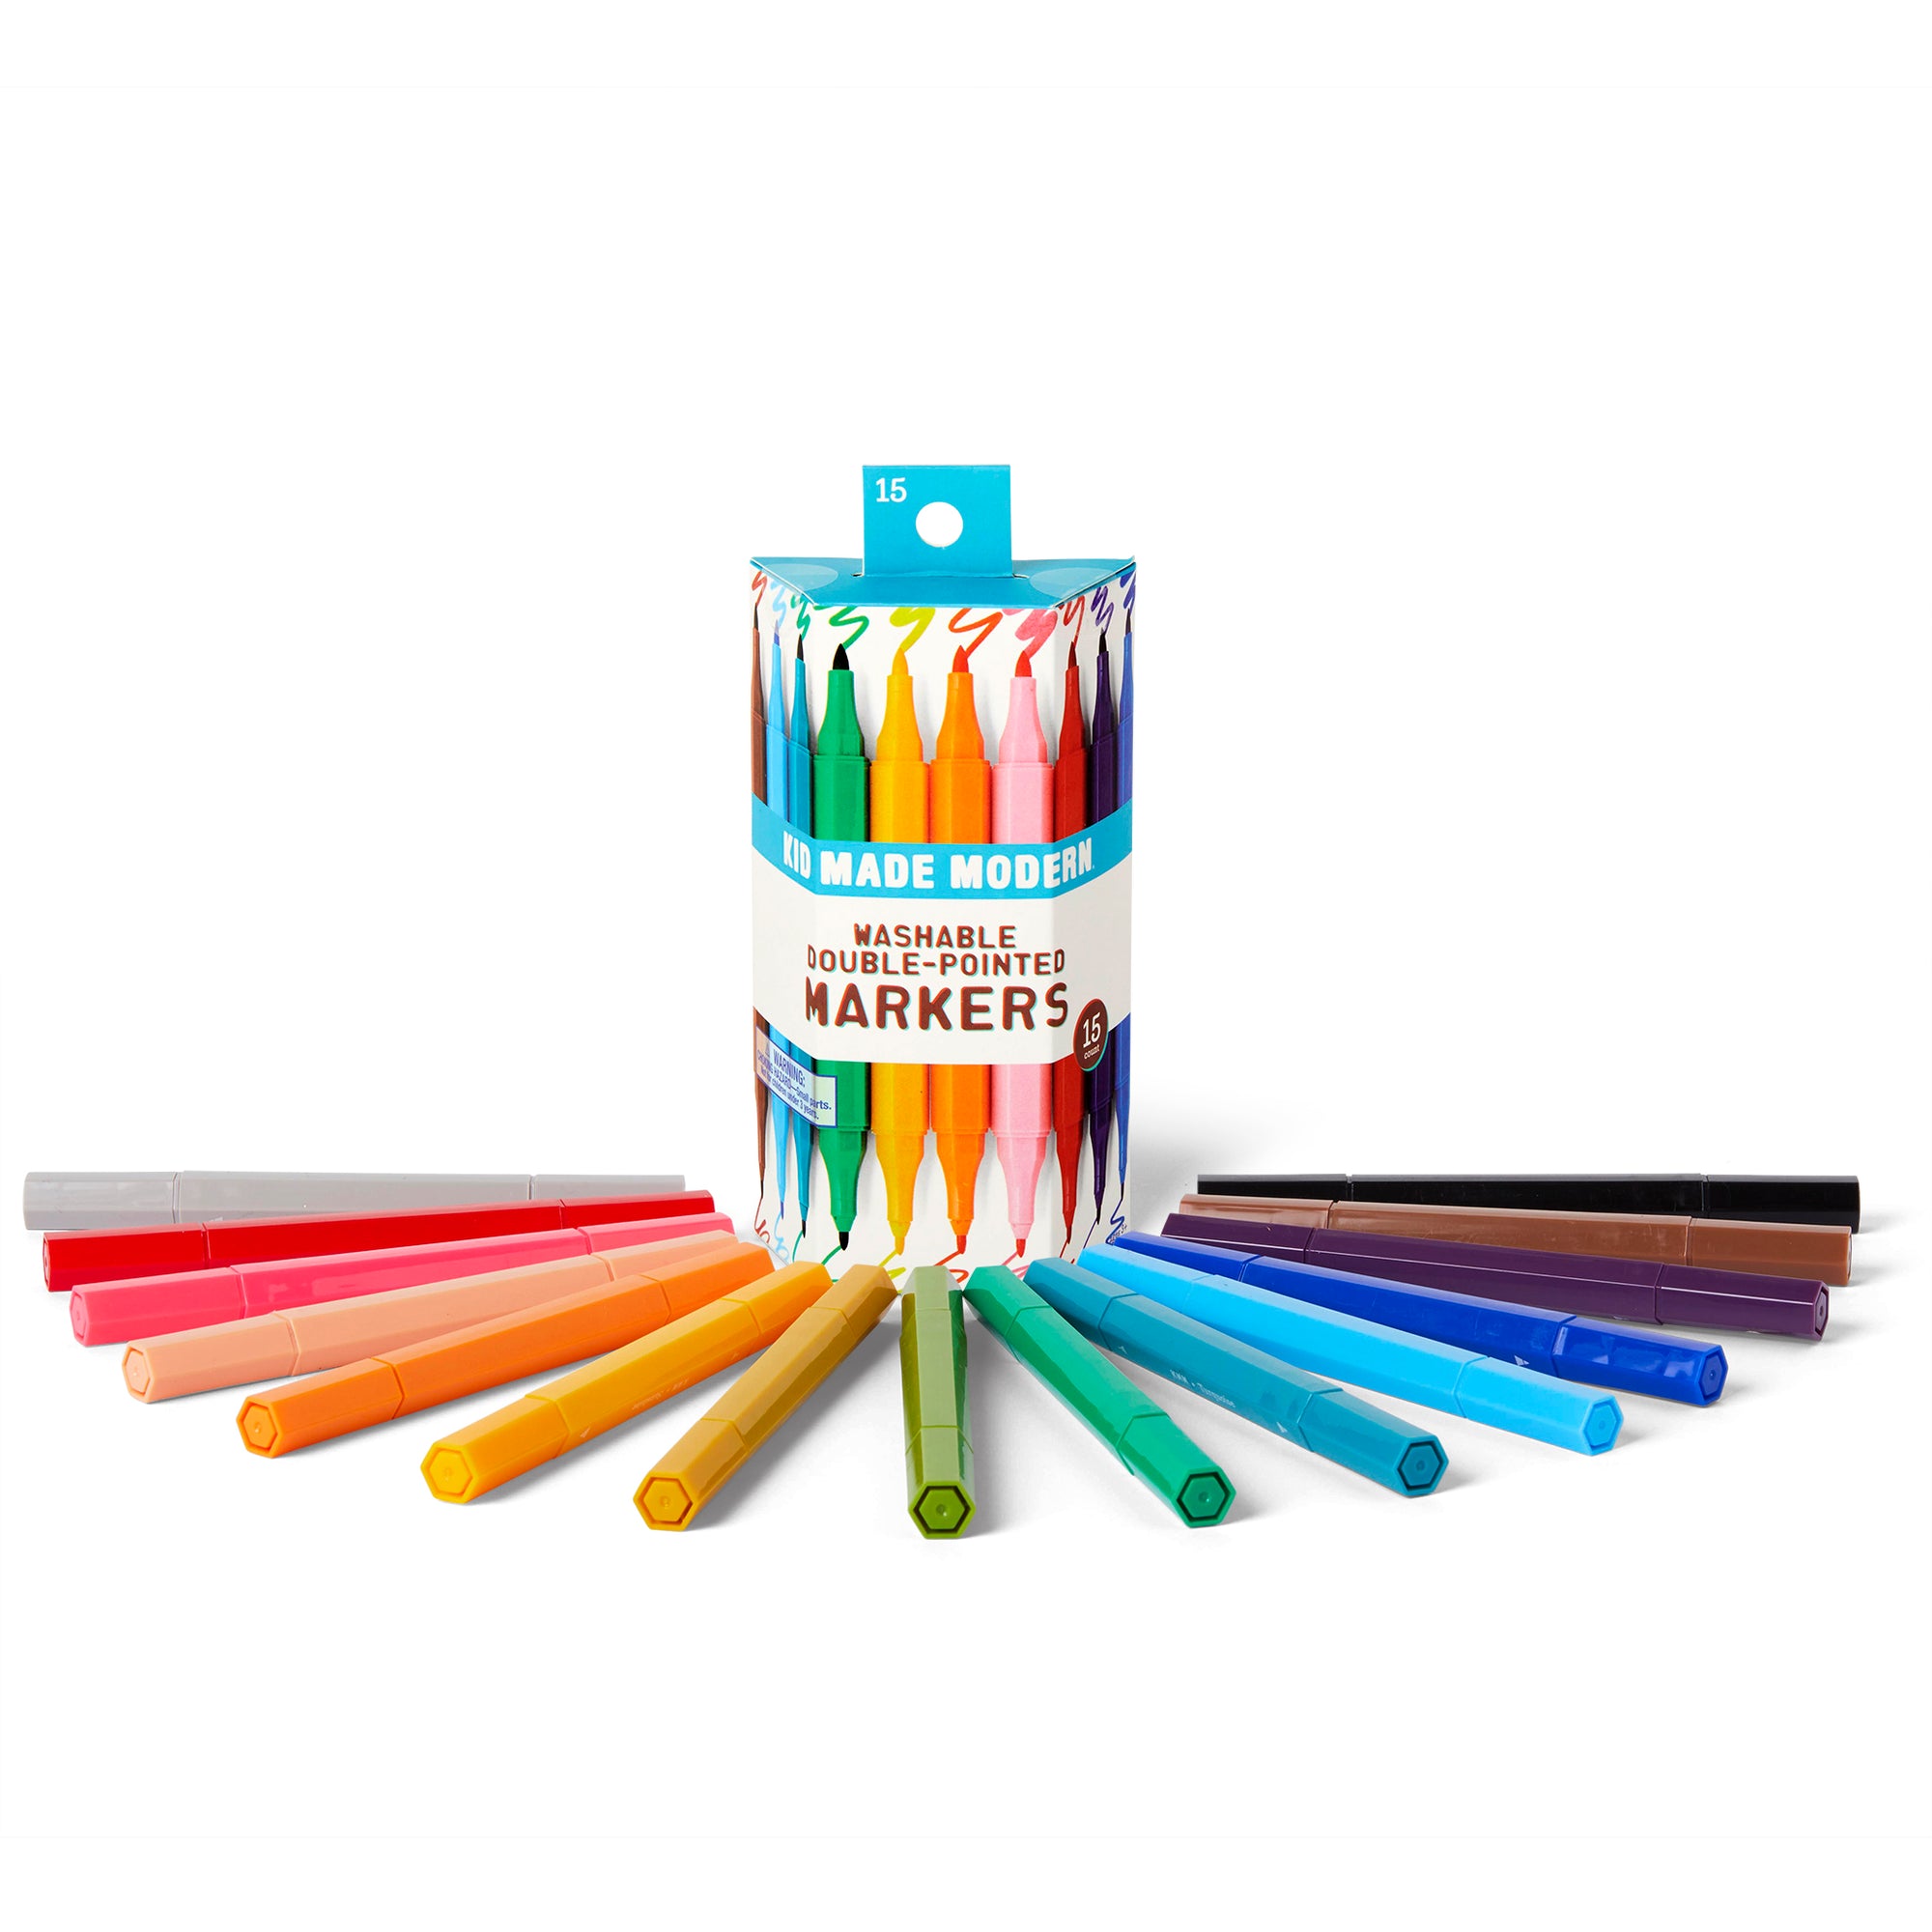 Washable Double Pointed Markers